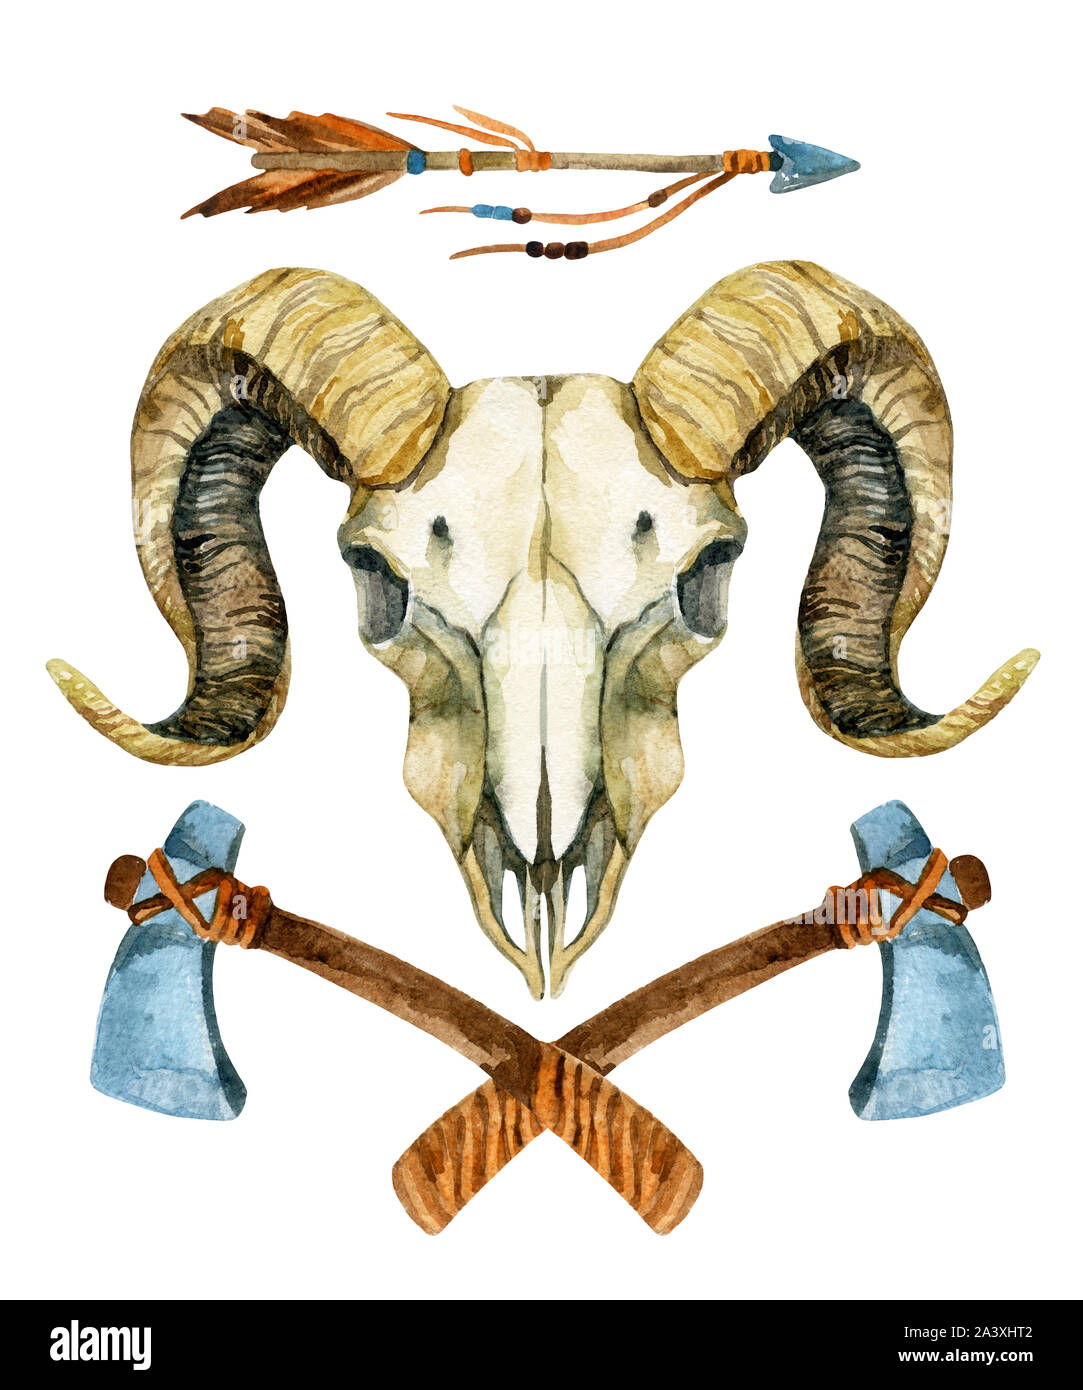 Ram skull. Sheep skull with tomahawk and arrow isolated on white background. Hand painted illustration Stock Photo